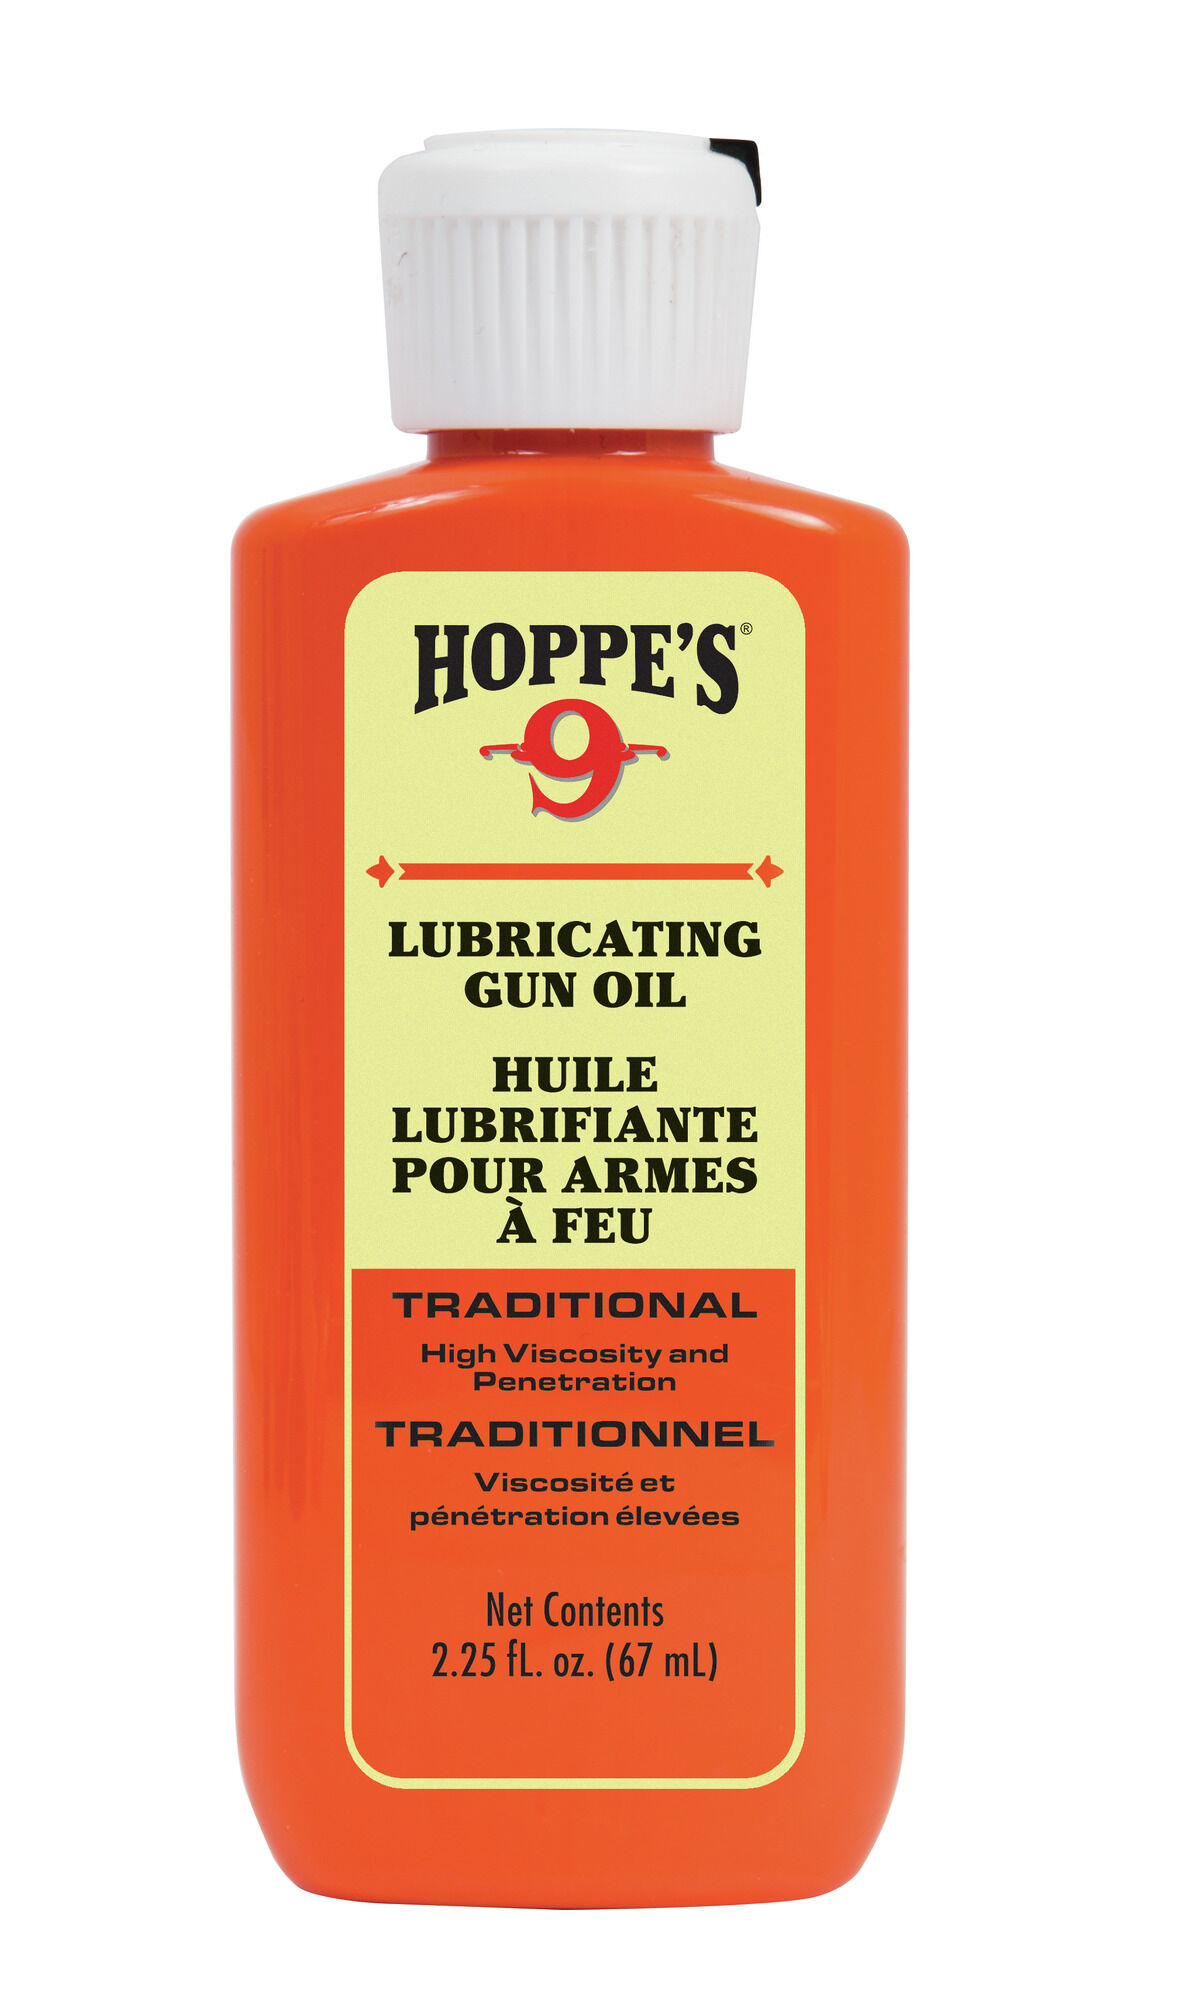 OEM Original Hoppe's 9 Hoppes #9 Cleaning Decal Sticker BUY 1 GET 1 FREE 